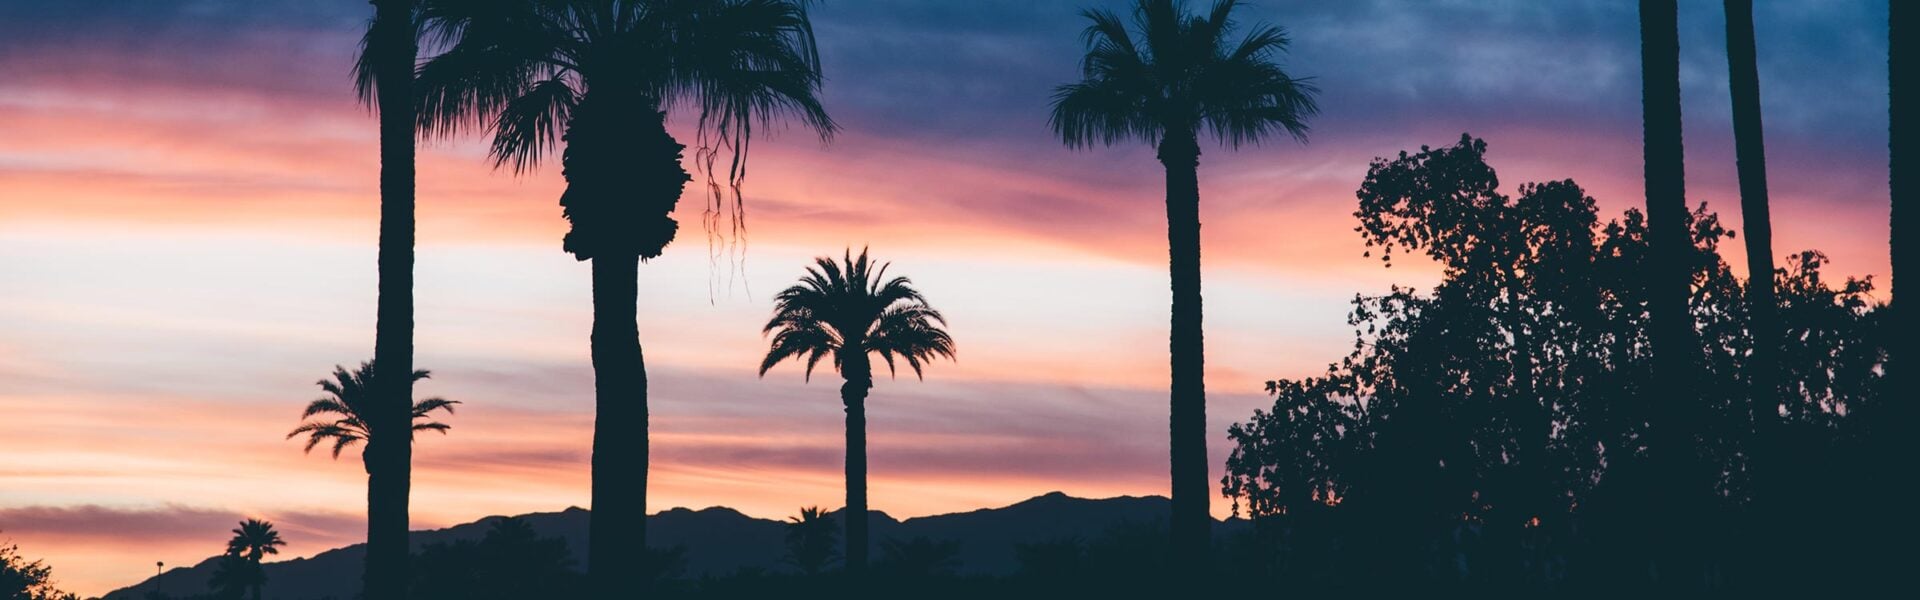 Silhouettes of palm trees and mountains against a sunset.